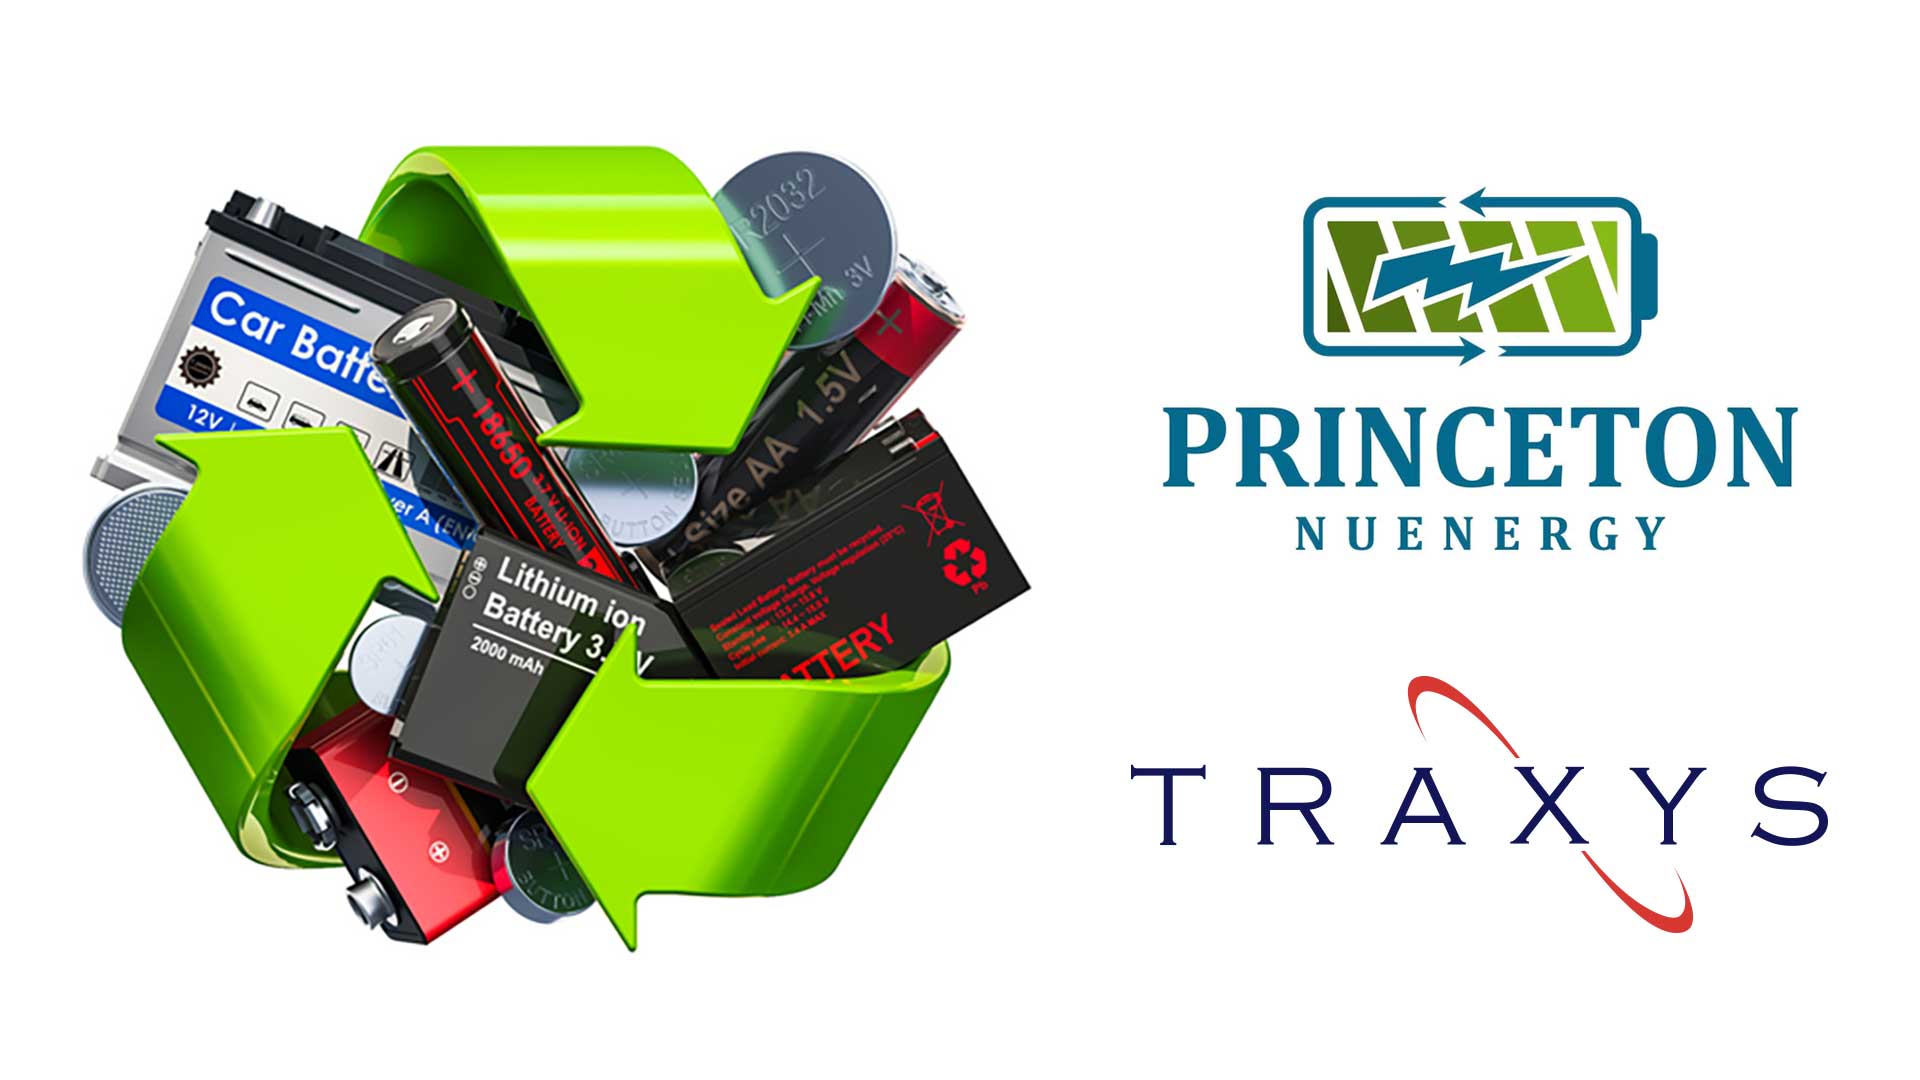 Princeton NuEnergy (PNE) and Traxys North America Enter MOA to Strengthen Battery Sustainability